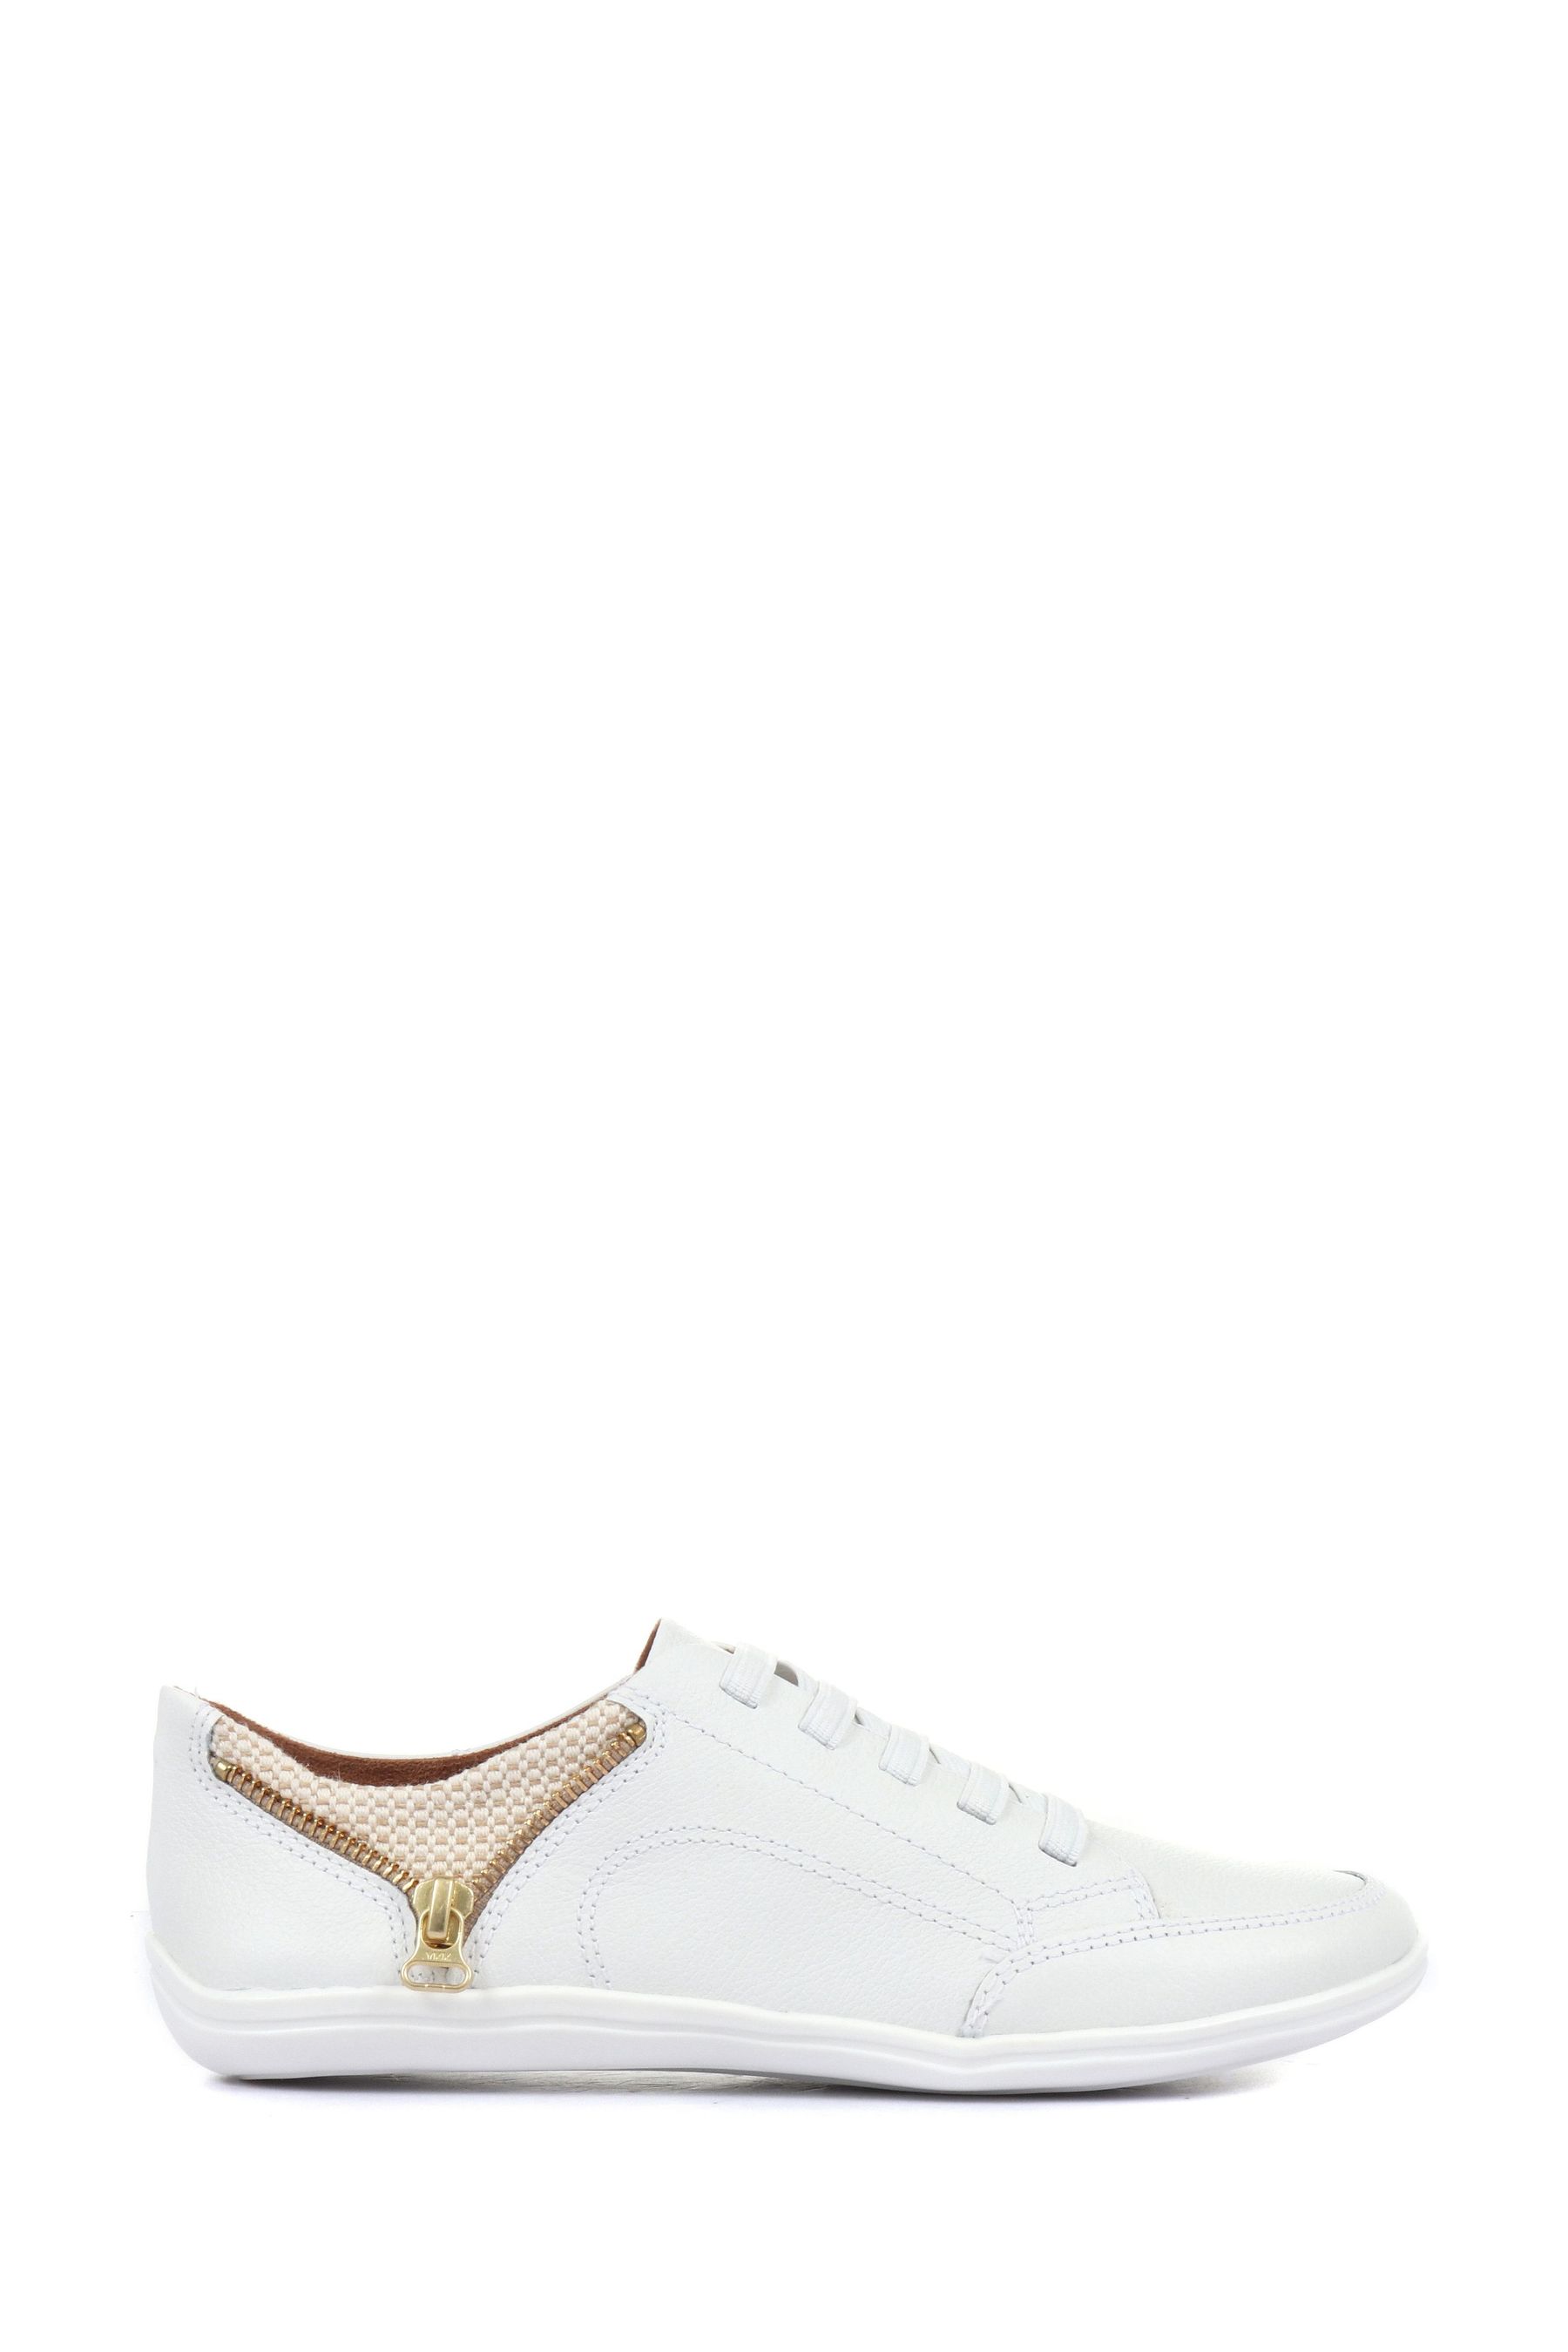 Buy Bellissimo Leather White Trainers with Zip Detail from Next Ireland